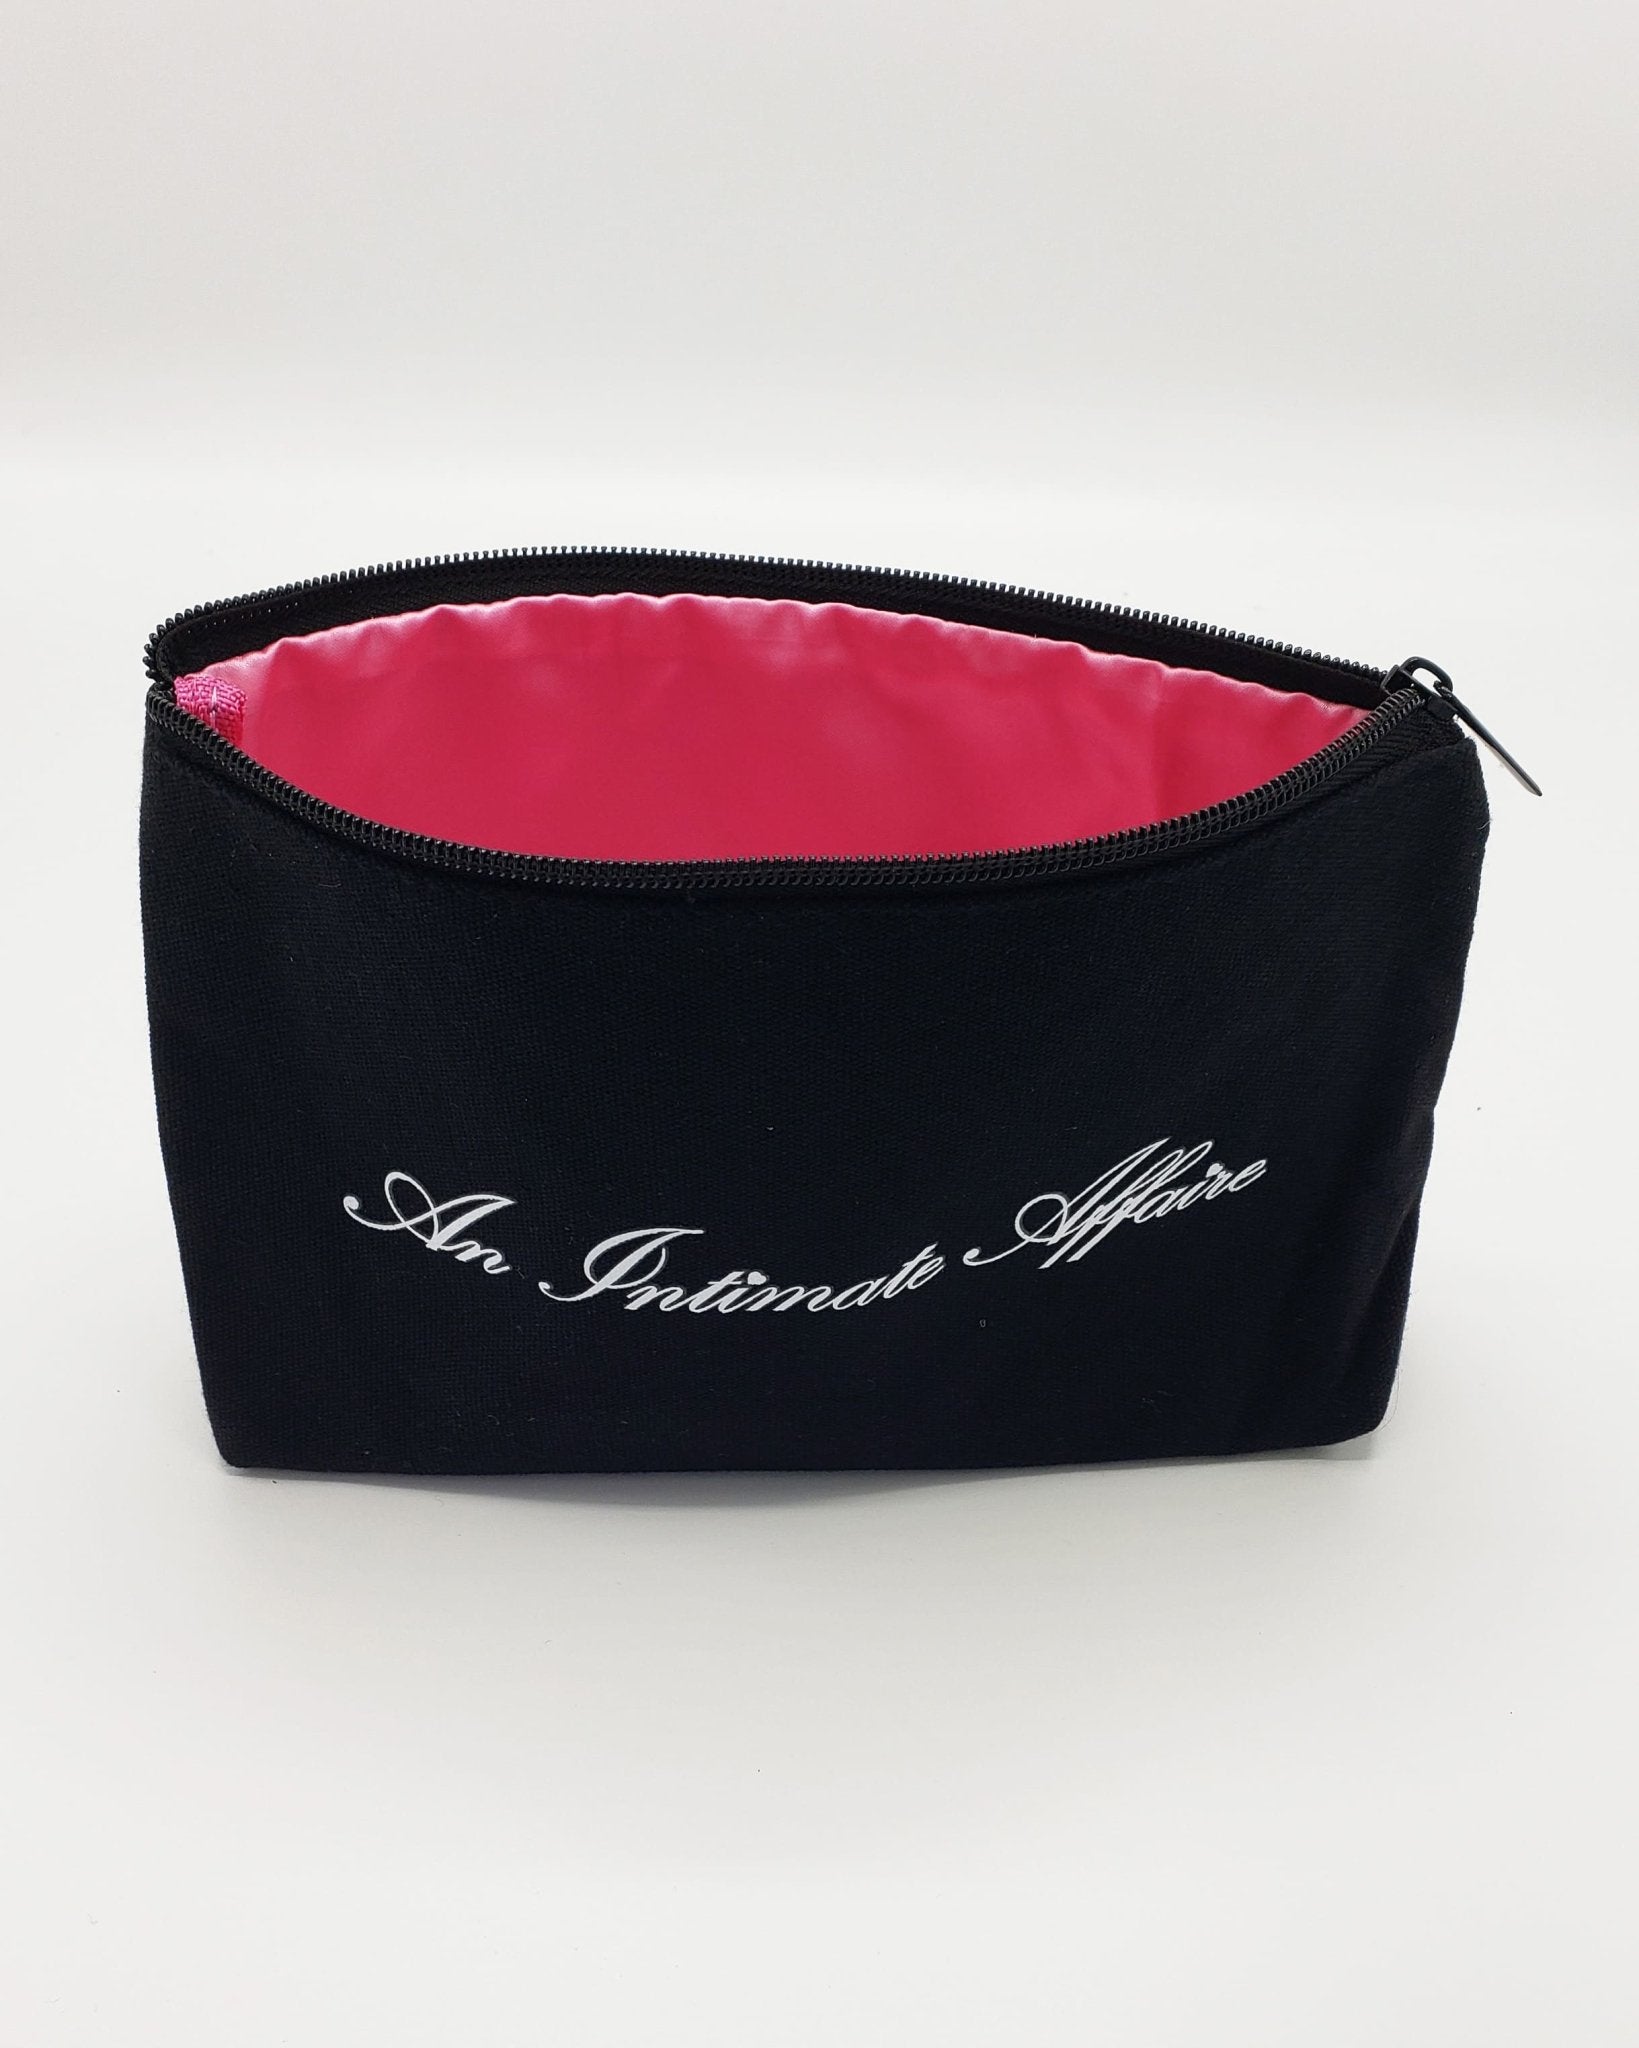 An Intimate Affaire Cosmetic Bag